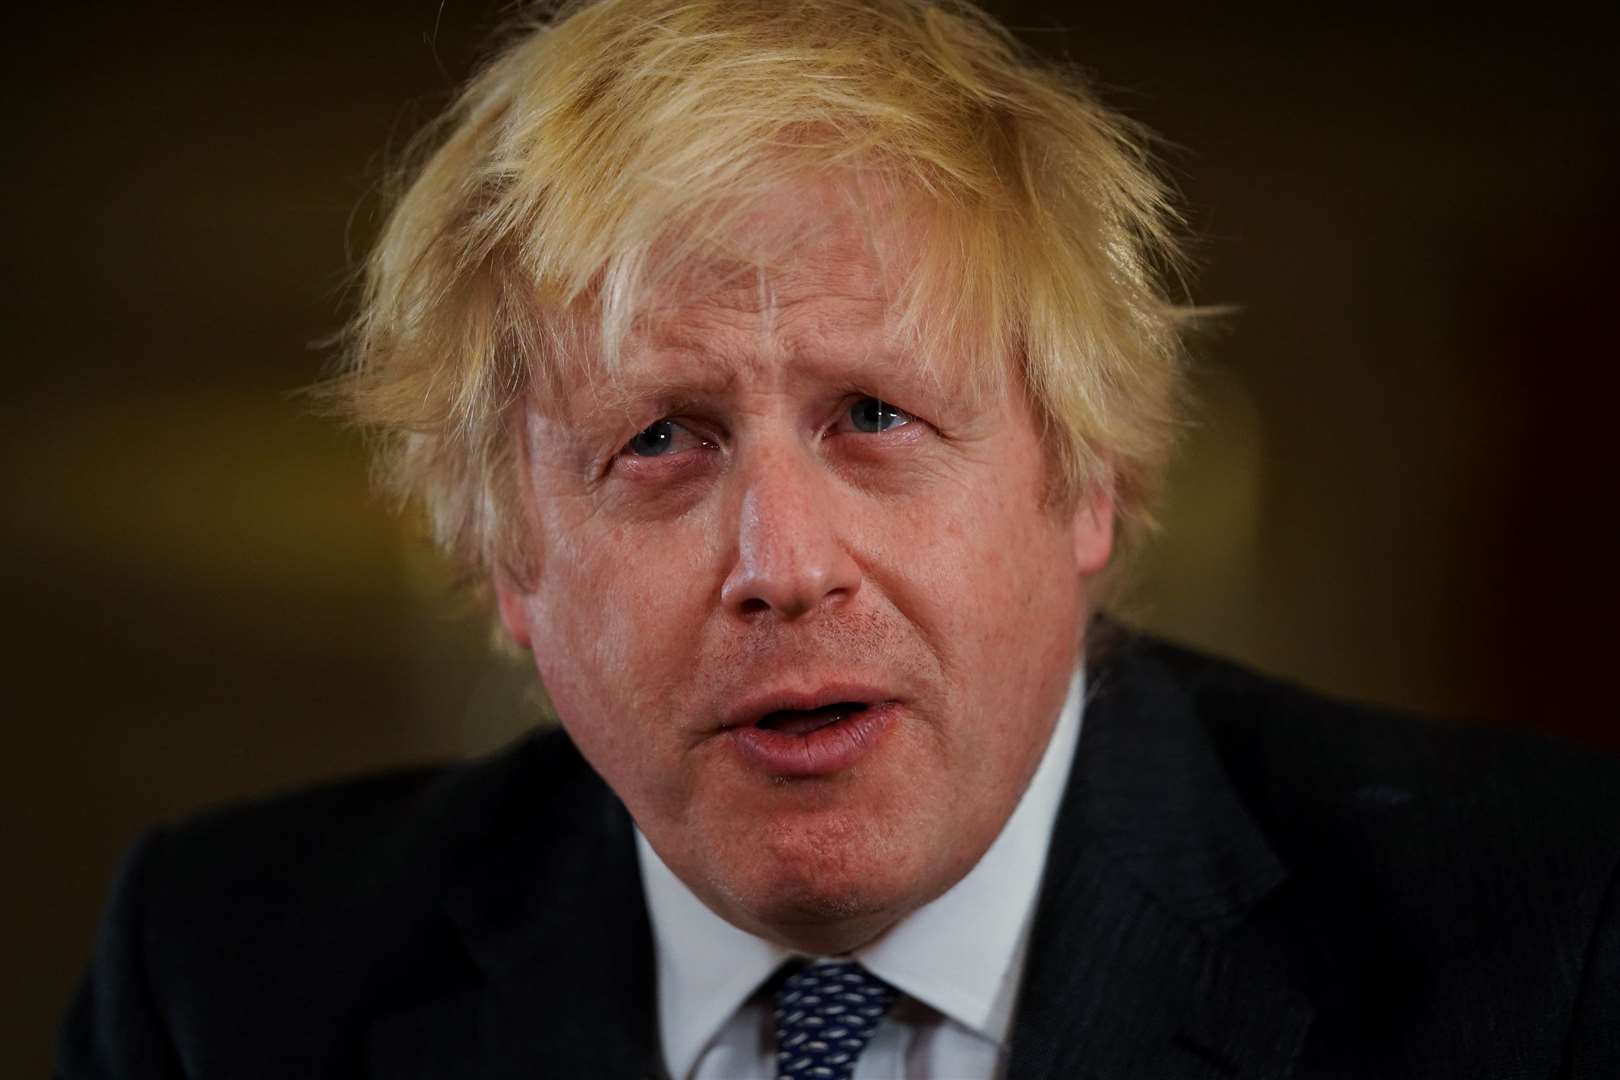 Prime Minister Boris Johnson has been squirming over reports of lockdown parties in Downing Street. Picture: Kirsty O’Connor/PA